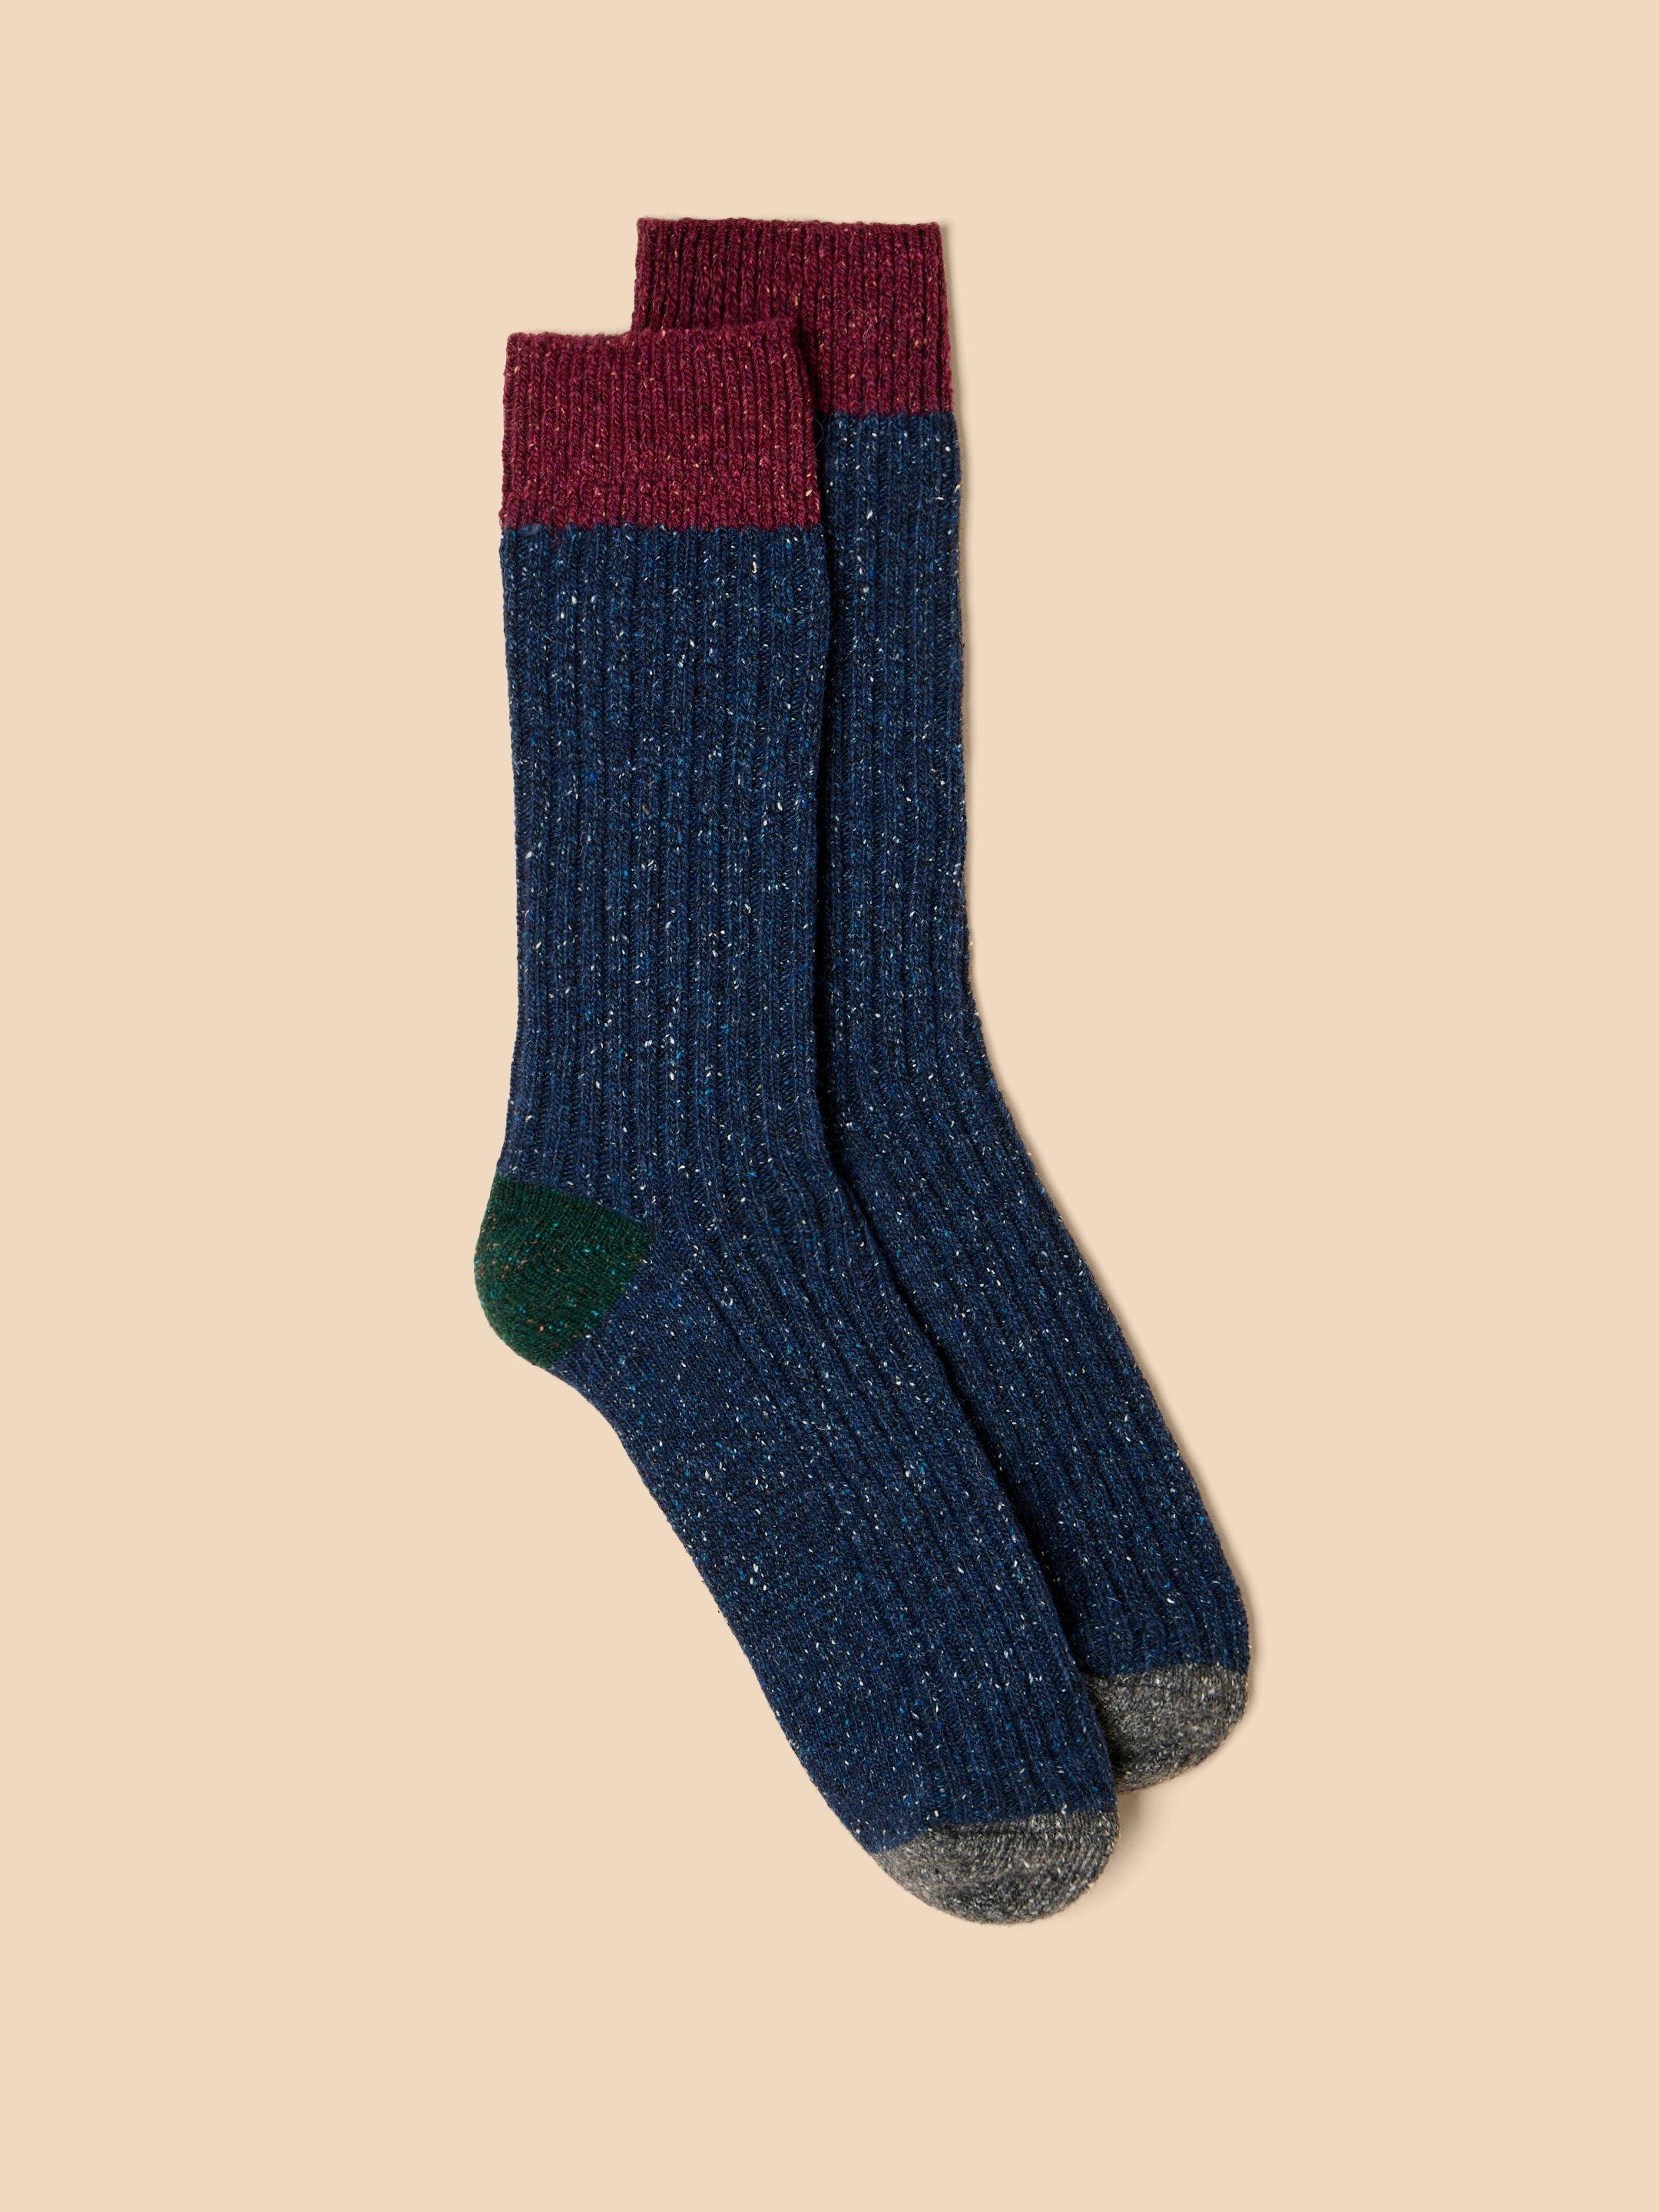 Nep Rib Wool Mix Boot Sock in NAVY MULTI - FLAT FRONT